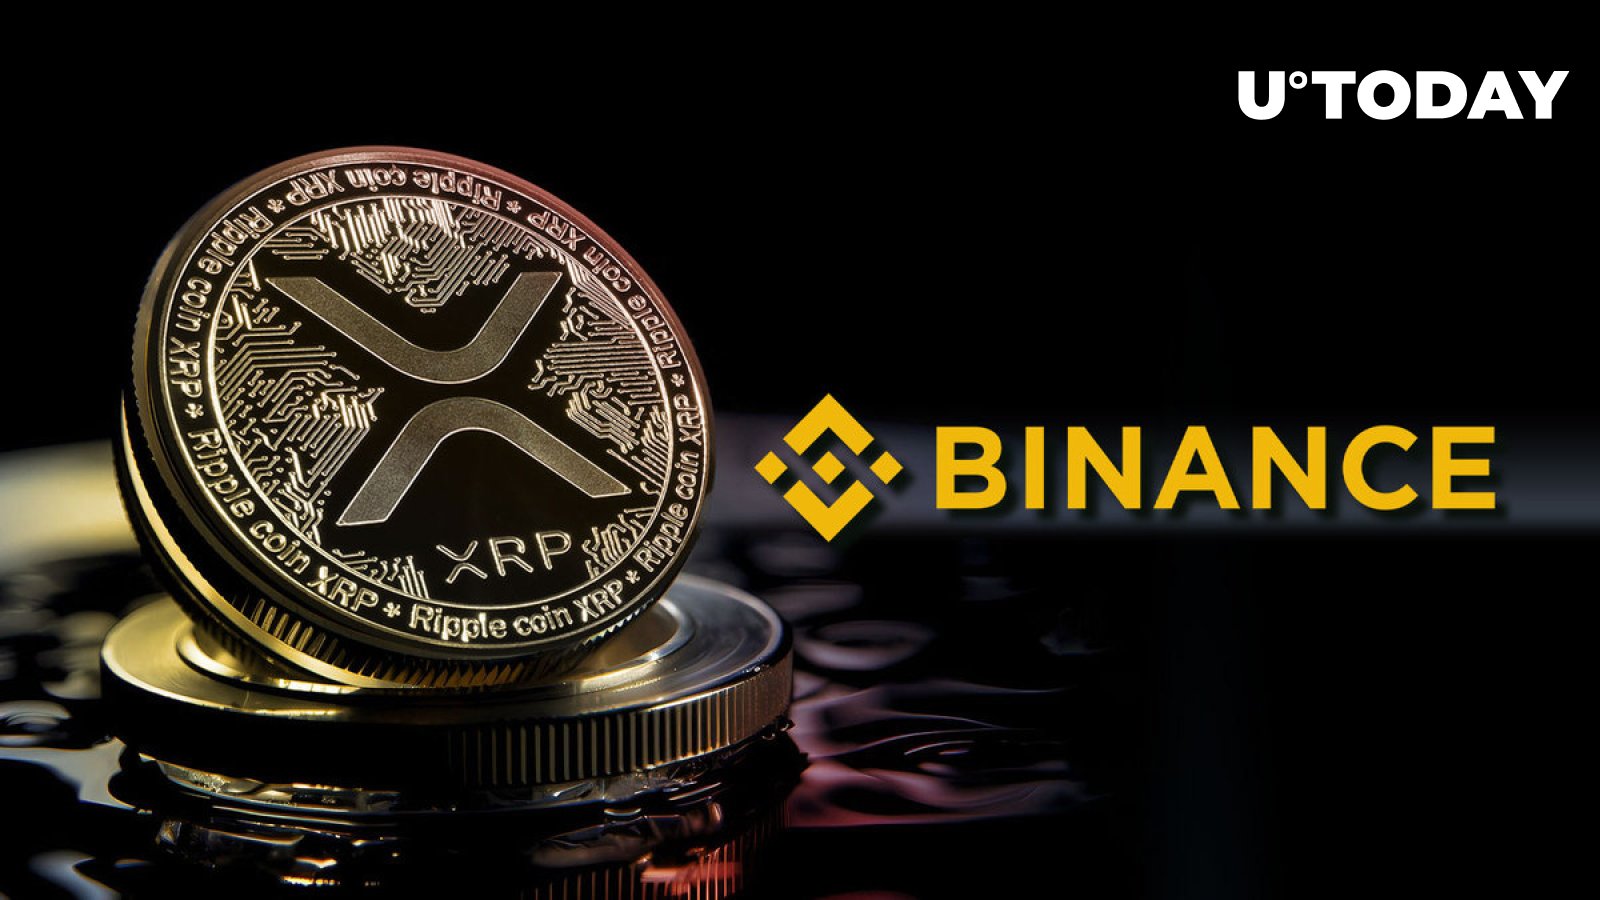 Tens of Millions of XRP Out of Binance and into Unknown